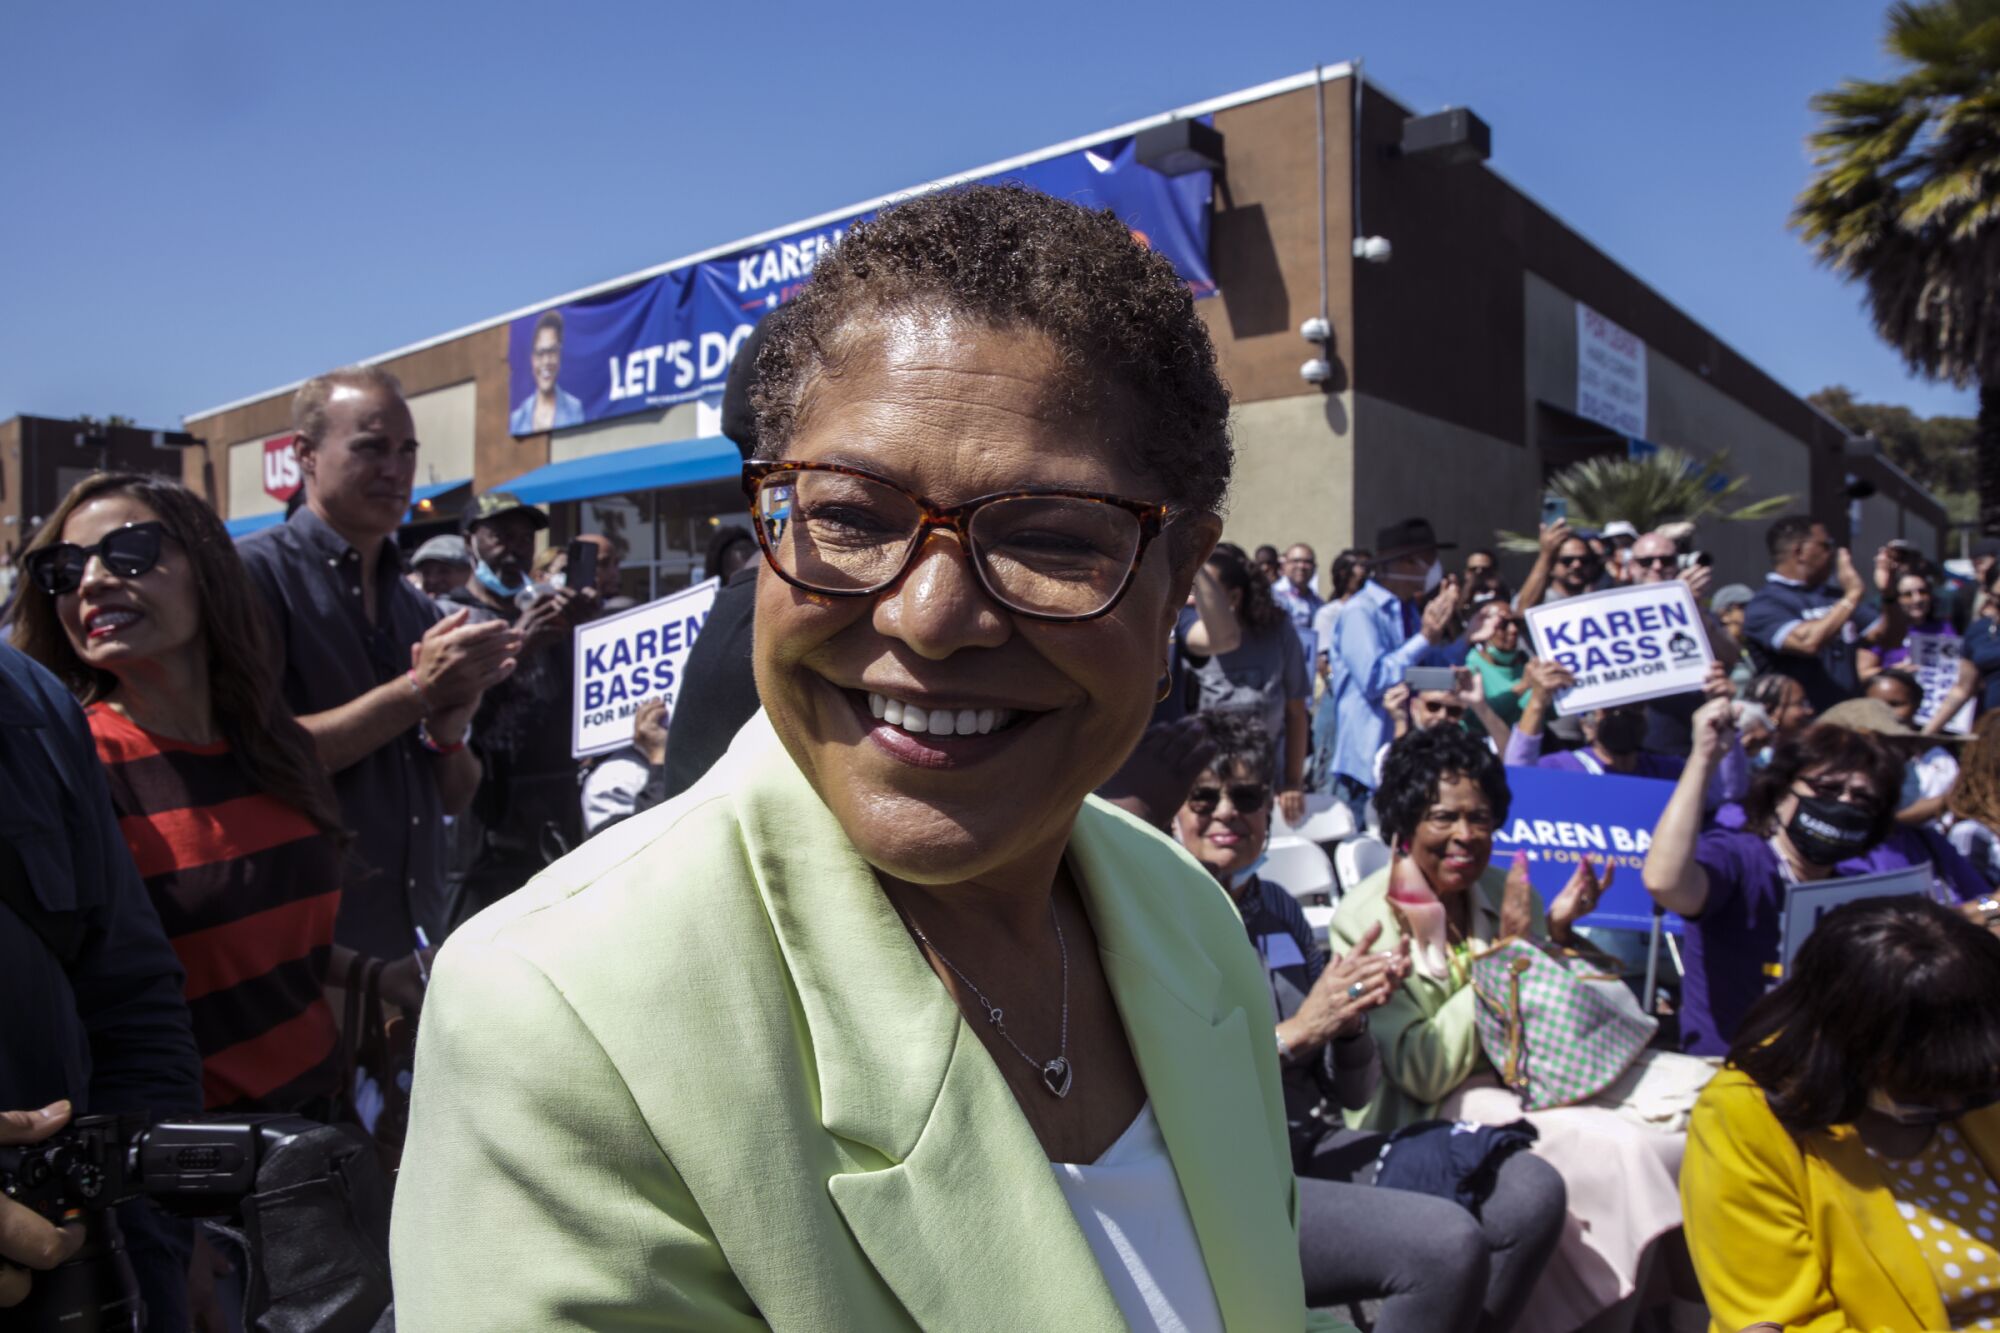 Supporters surround Rep. Karen Bass outside her mayoral campaign headquarters.